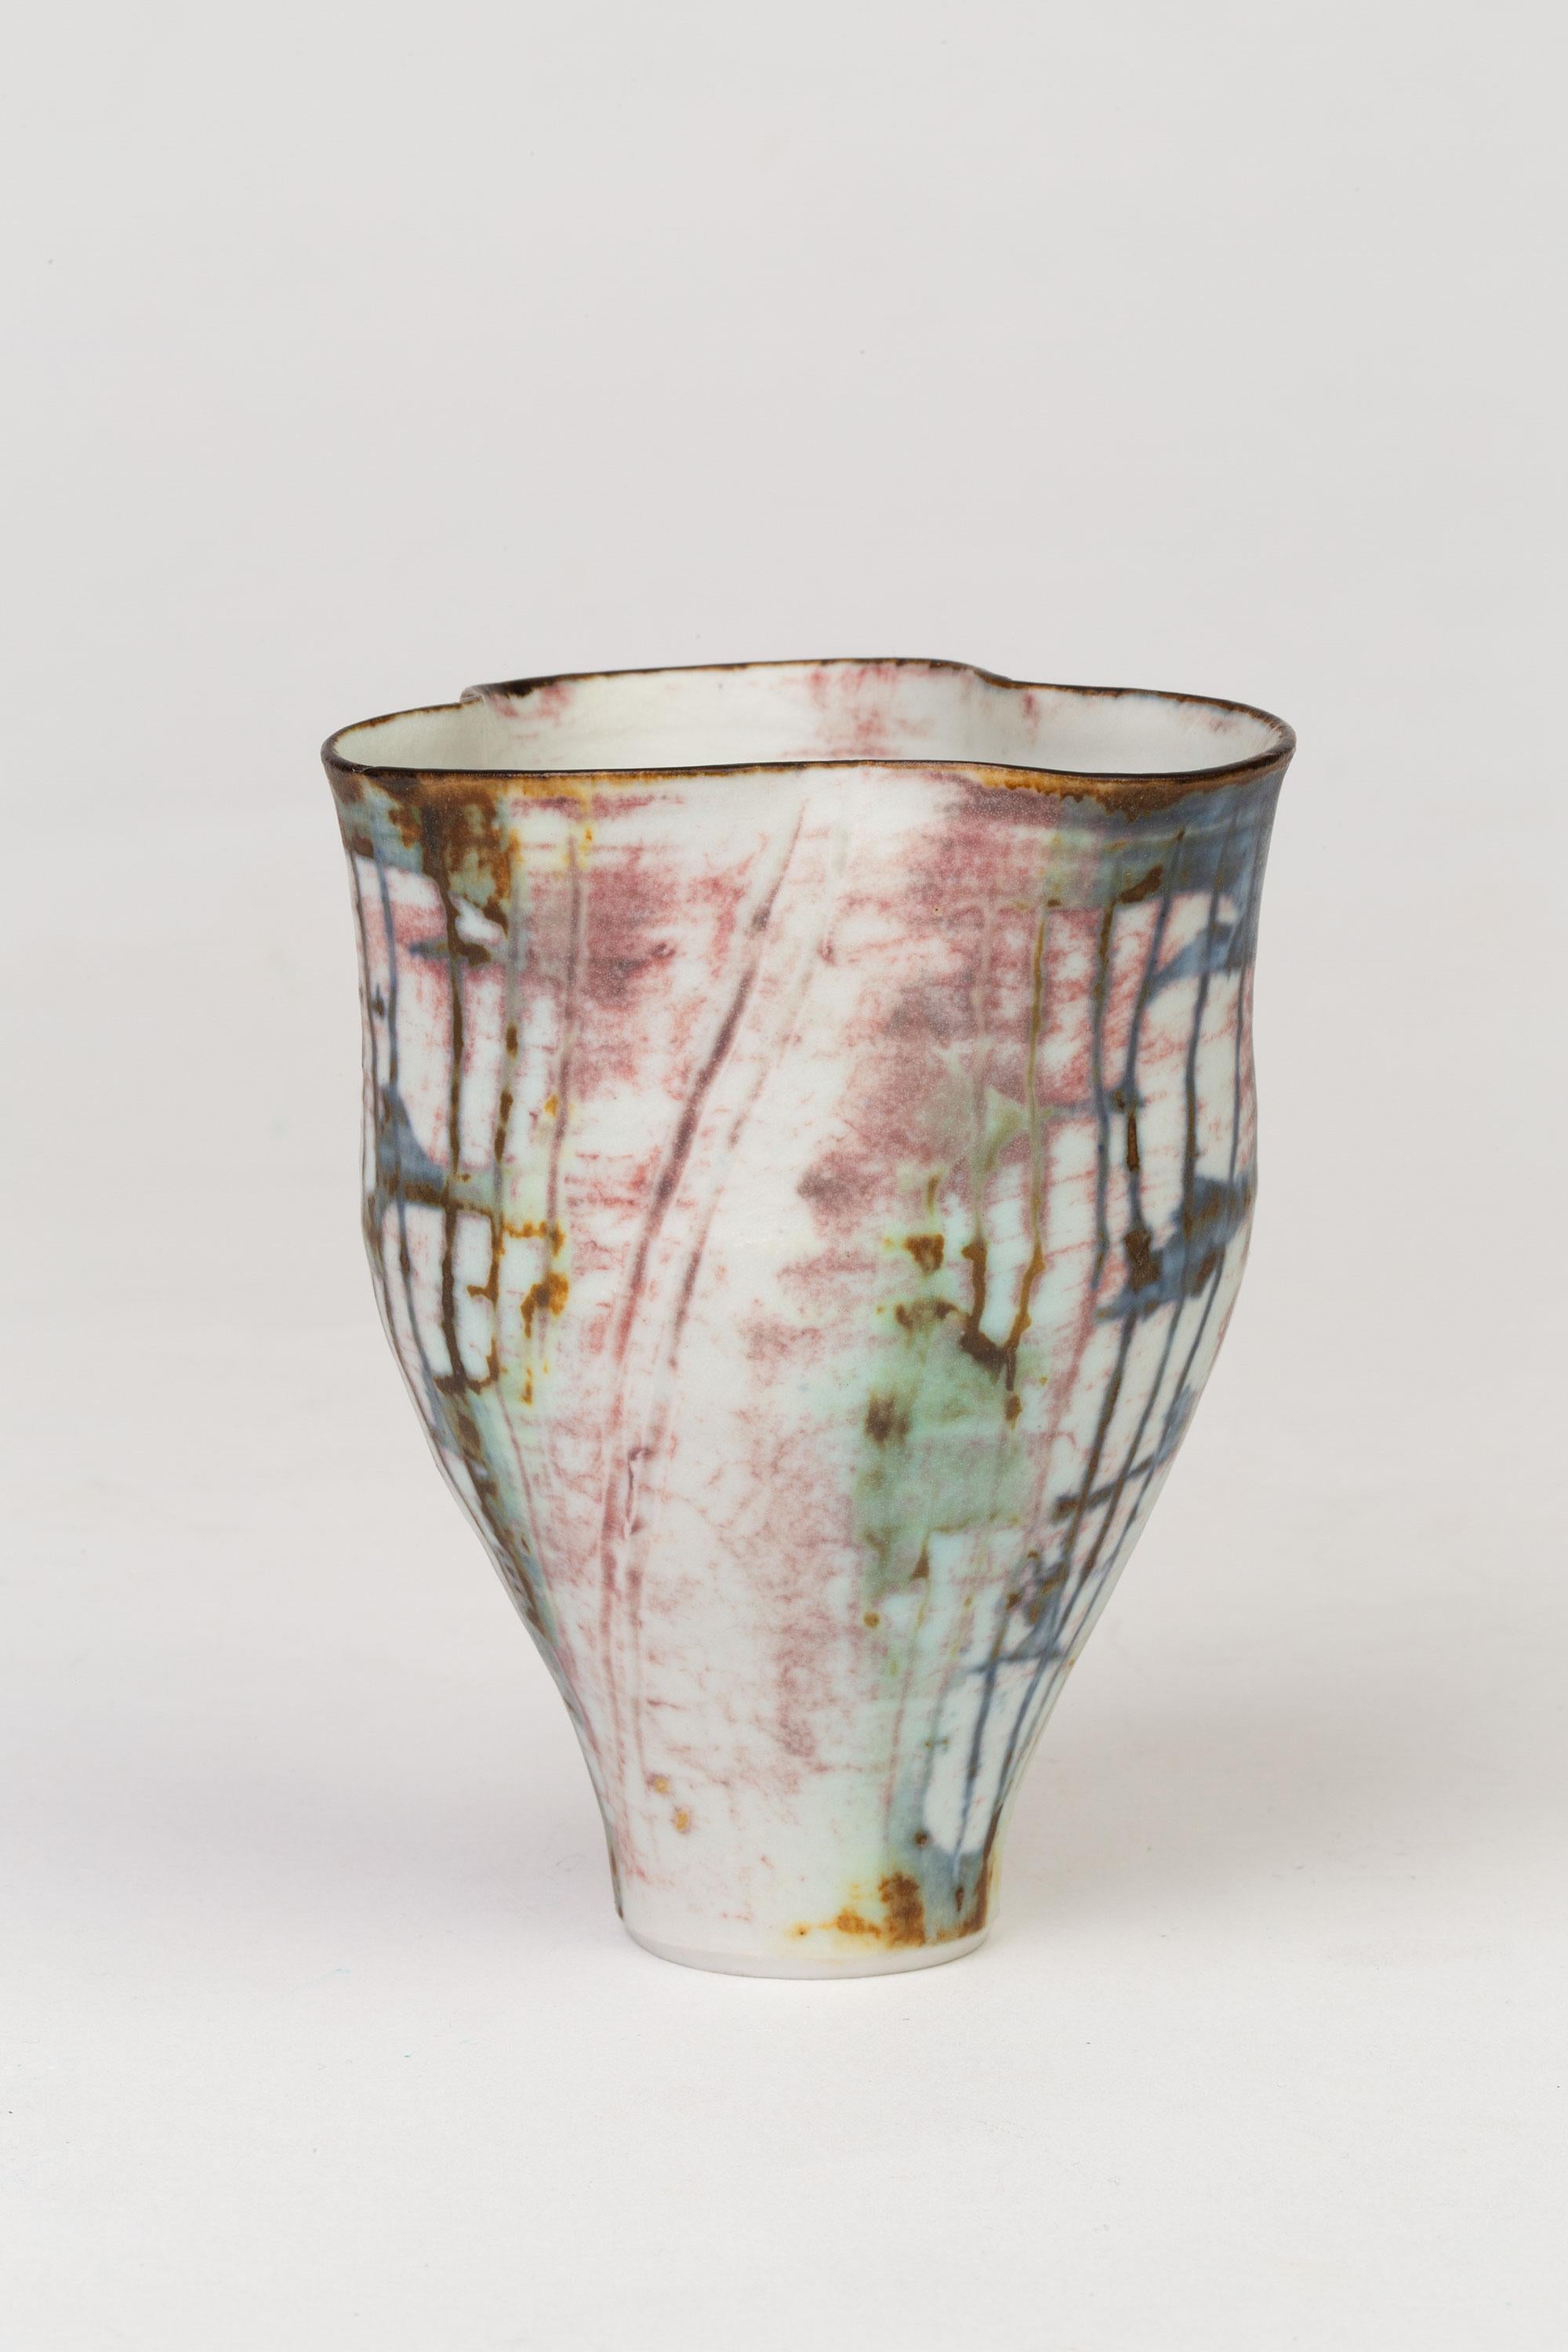 A fine British studio pottery porcelain fluted vase with wax linear decoration by renowned potter Marianne De Trey (1913-2016) and dating between 1980 and 1985. This very finely made vase has a pinched top creating three rounded edges and is